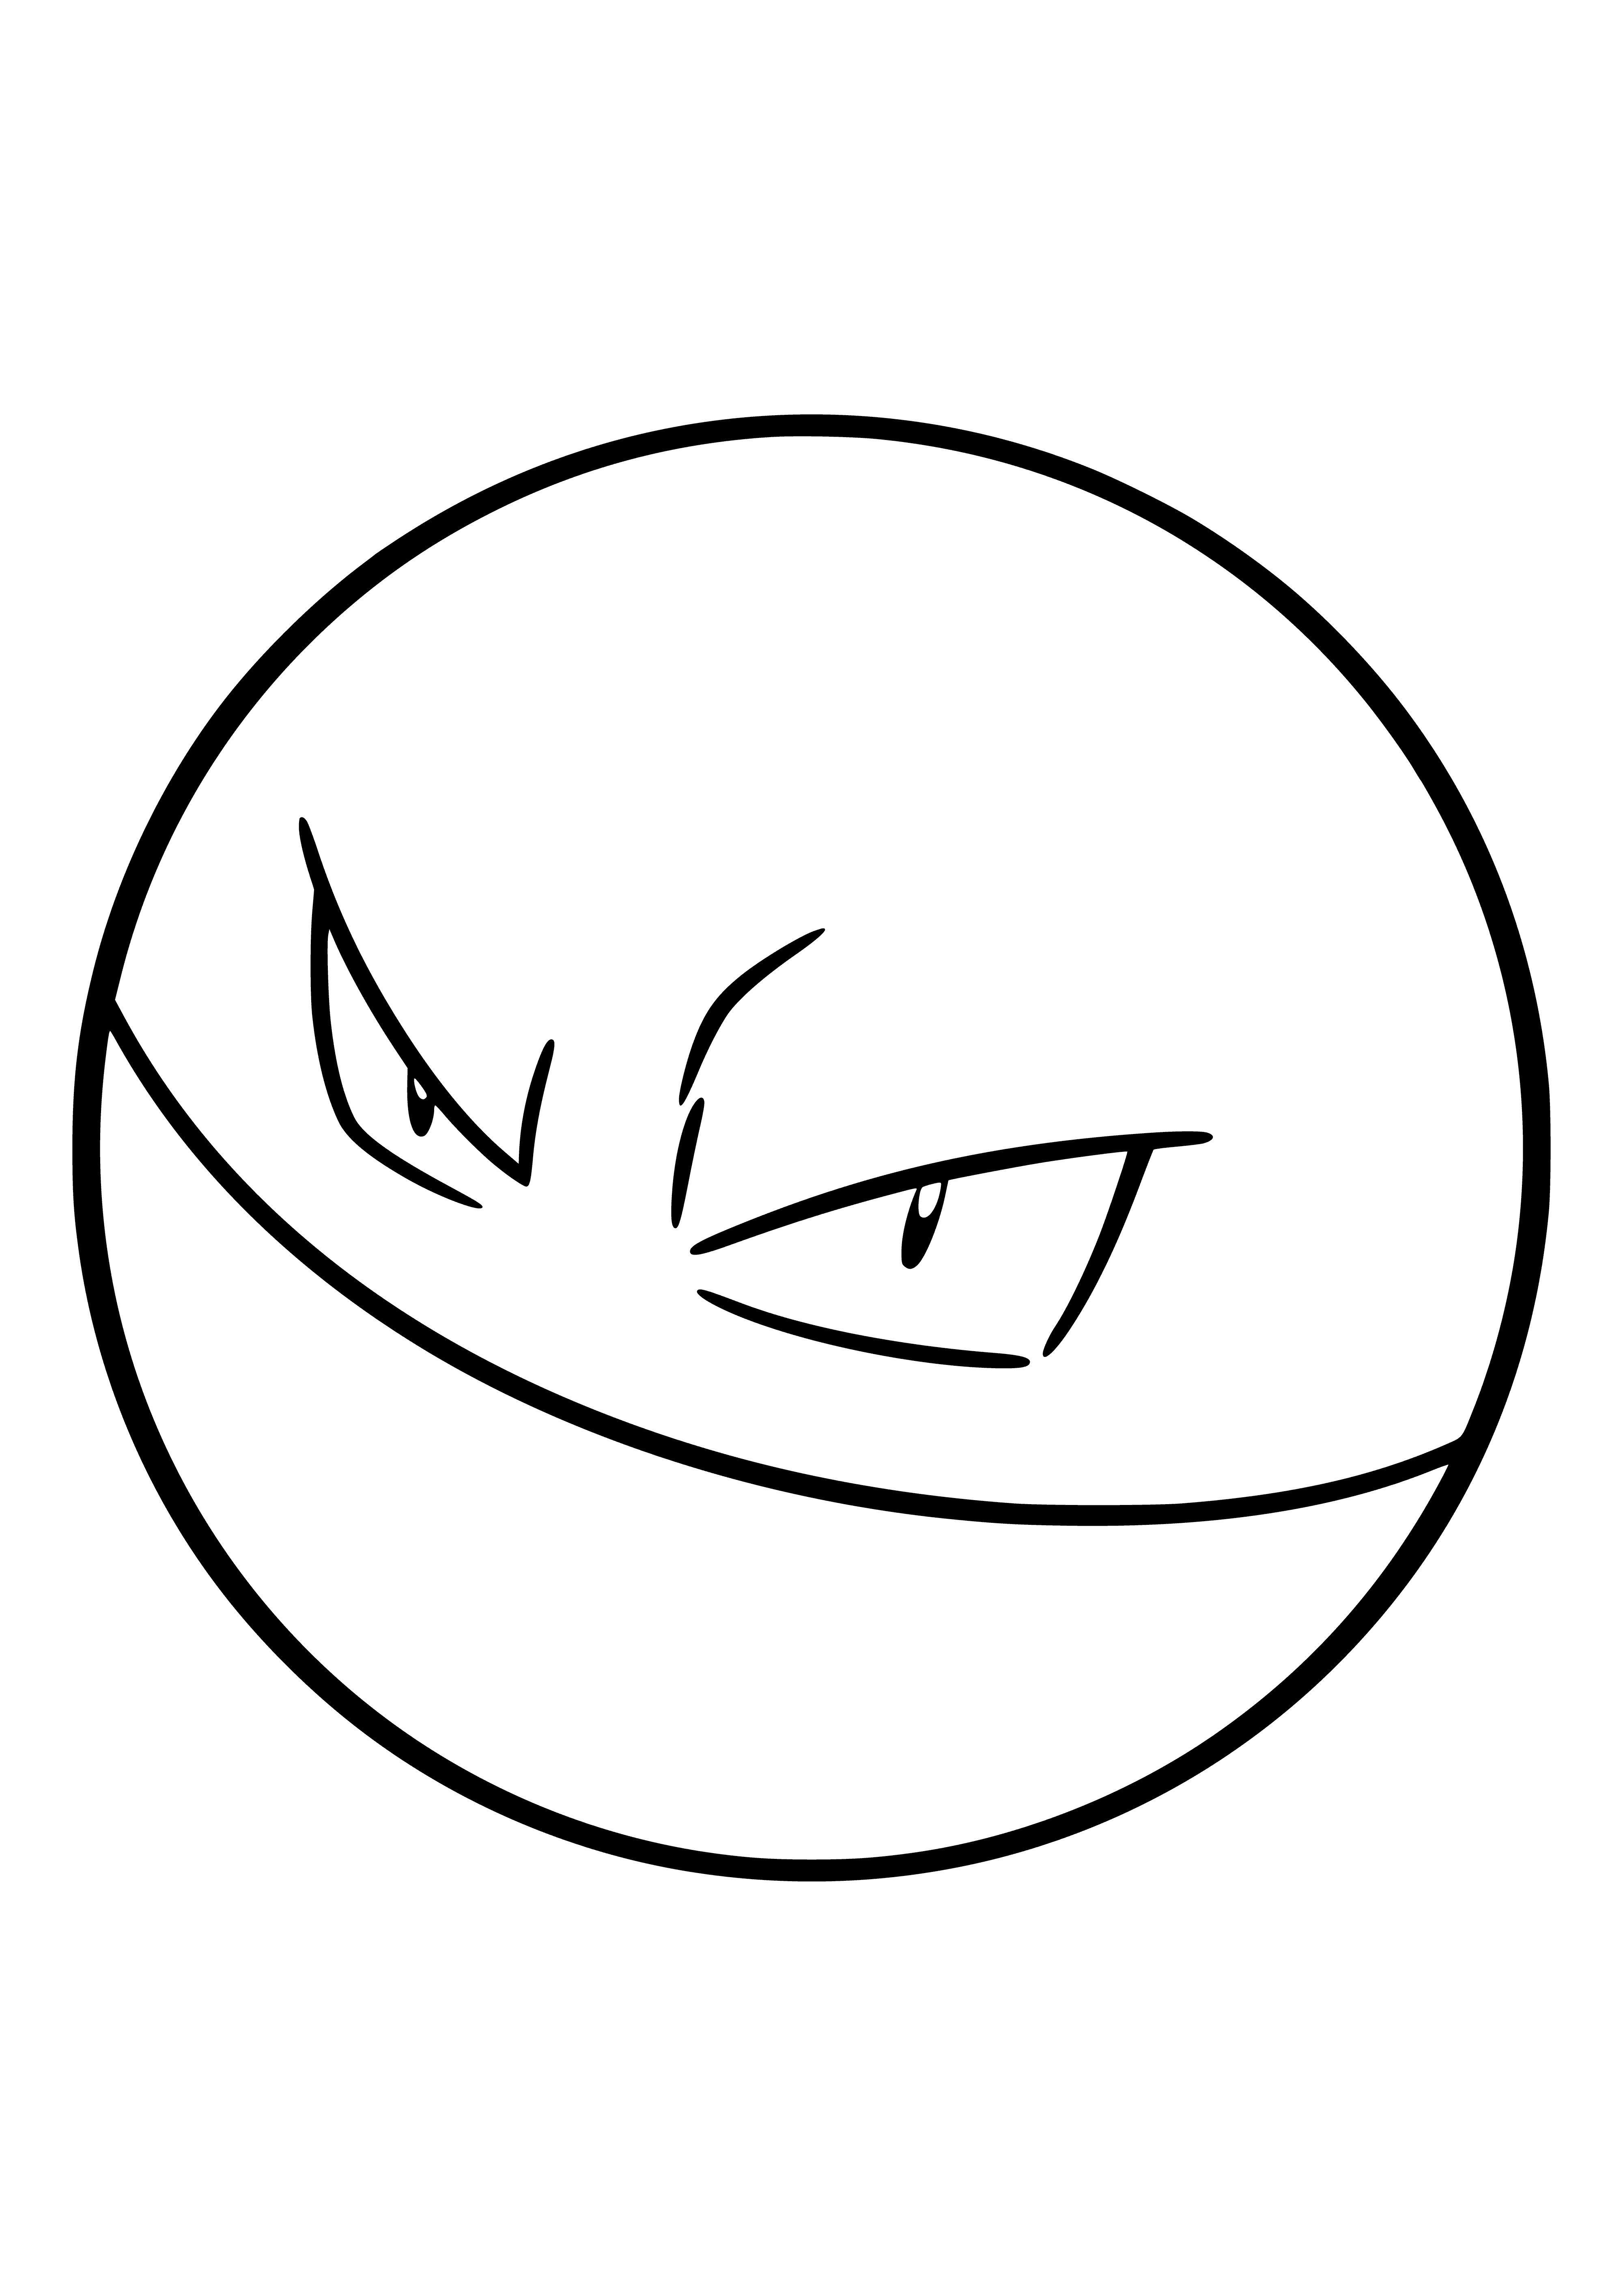 coloring page: Voltorb is a spherical, red Pokémon w/white, lightning bolt-shaped mark, black eyes & large tail fin. Prone to self-destruction when agitated & found near power plants.